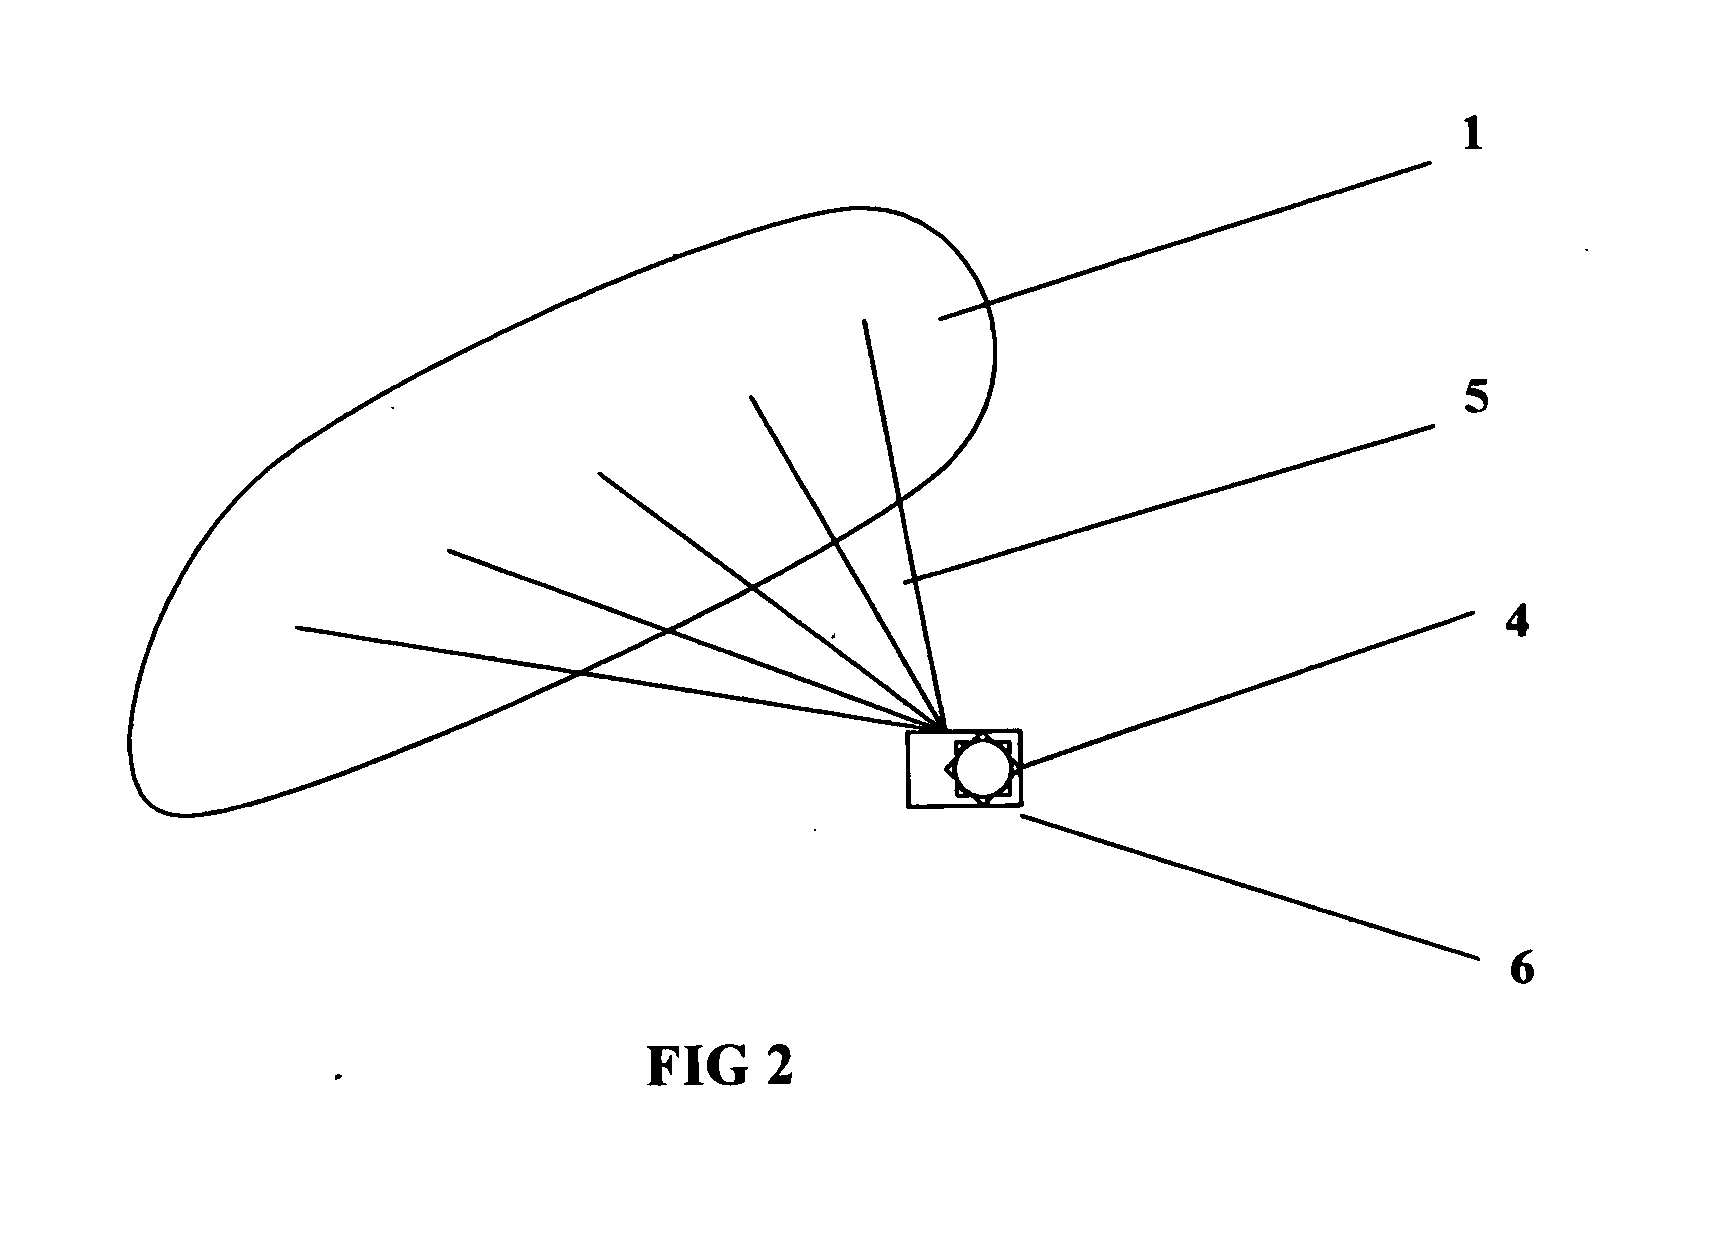 Acoustic-optical therapeutical devices and methods